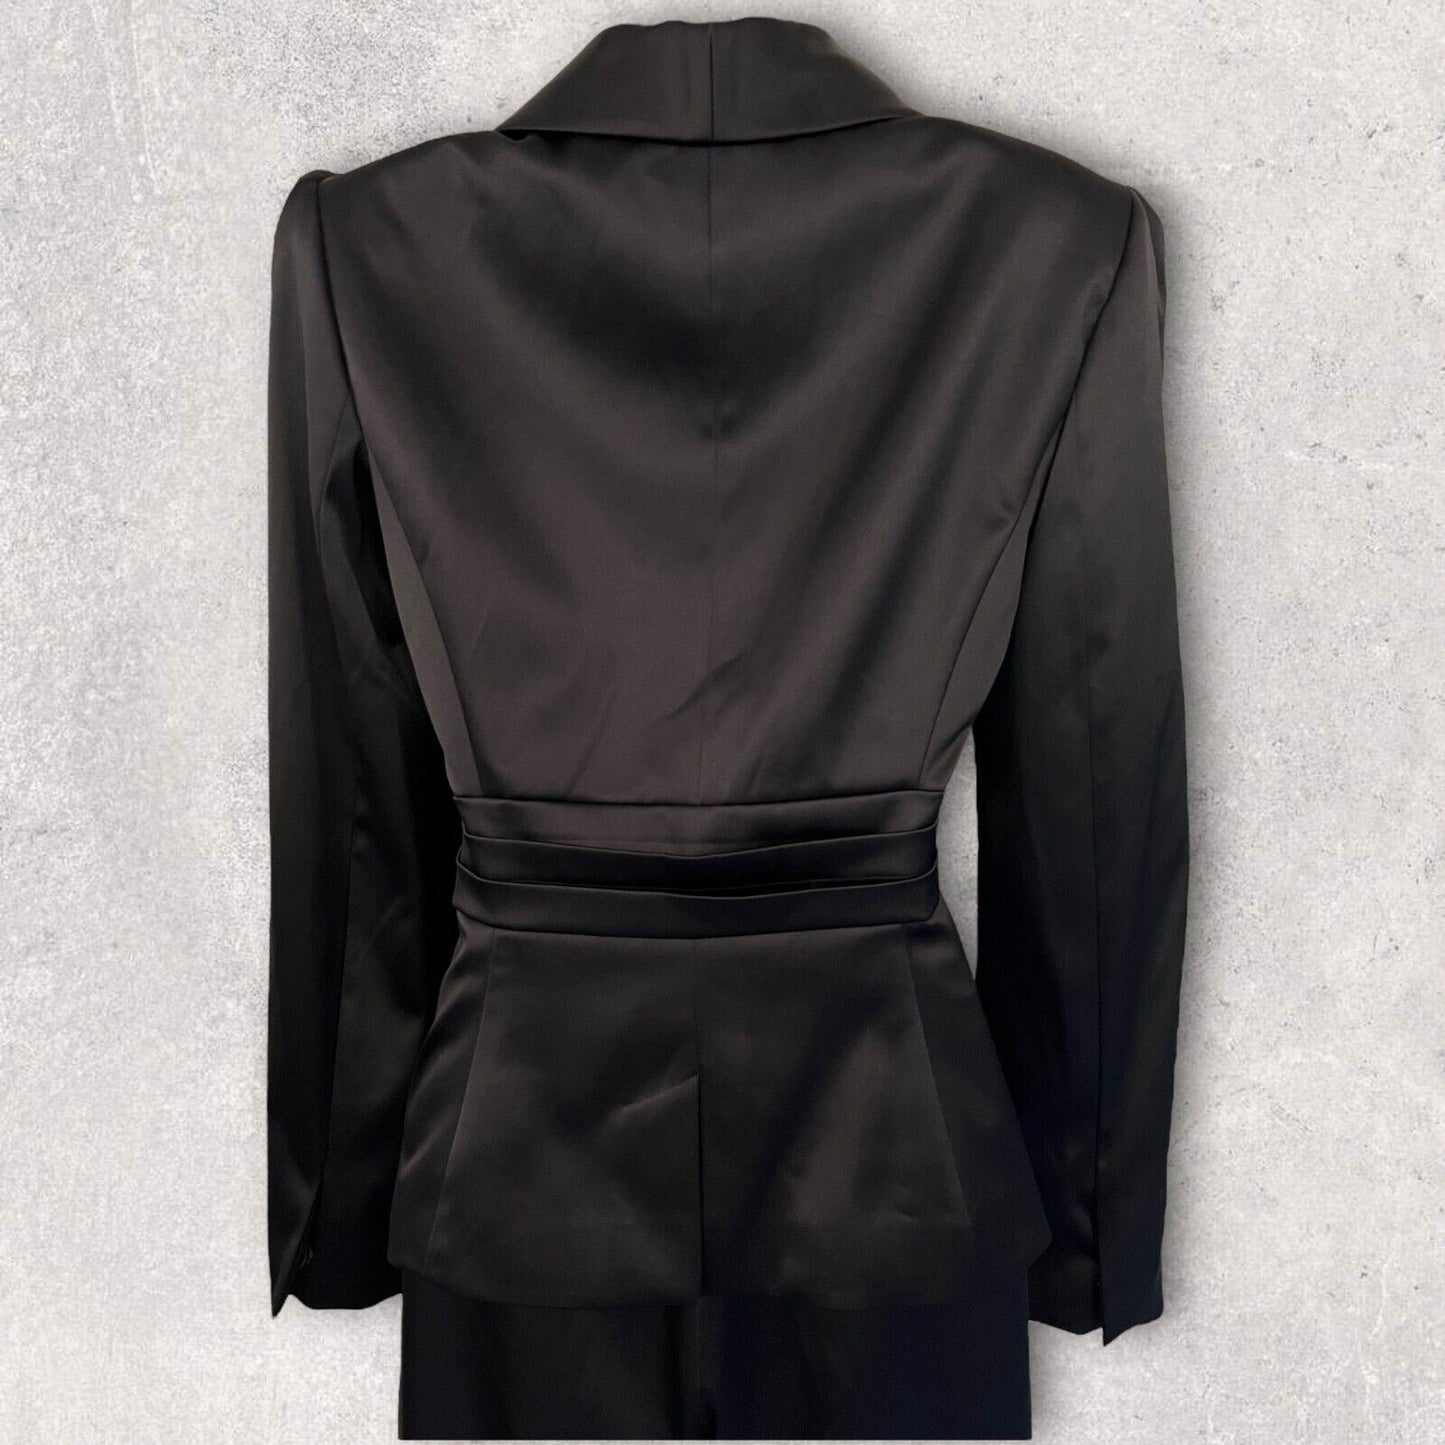 GIVe Black Satin Special Occasion Formal Jacket UK 12 US 8 EU 40 BNWT £149 Timeless Fashions